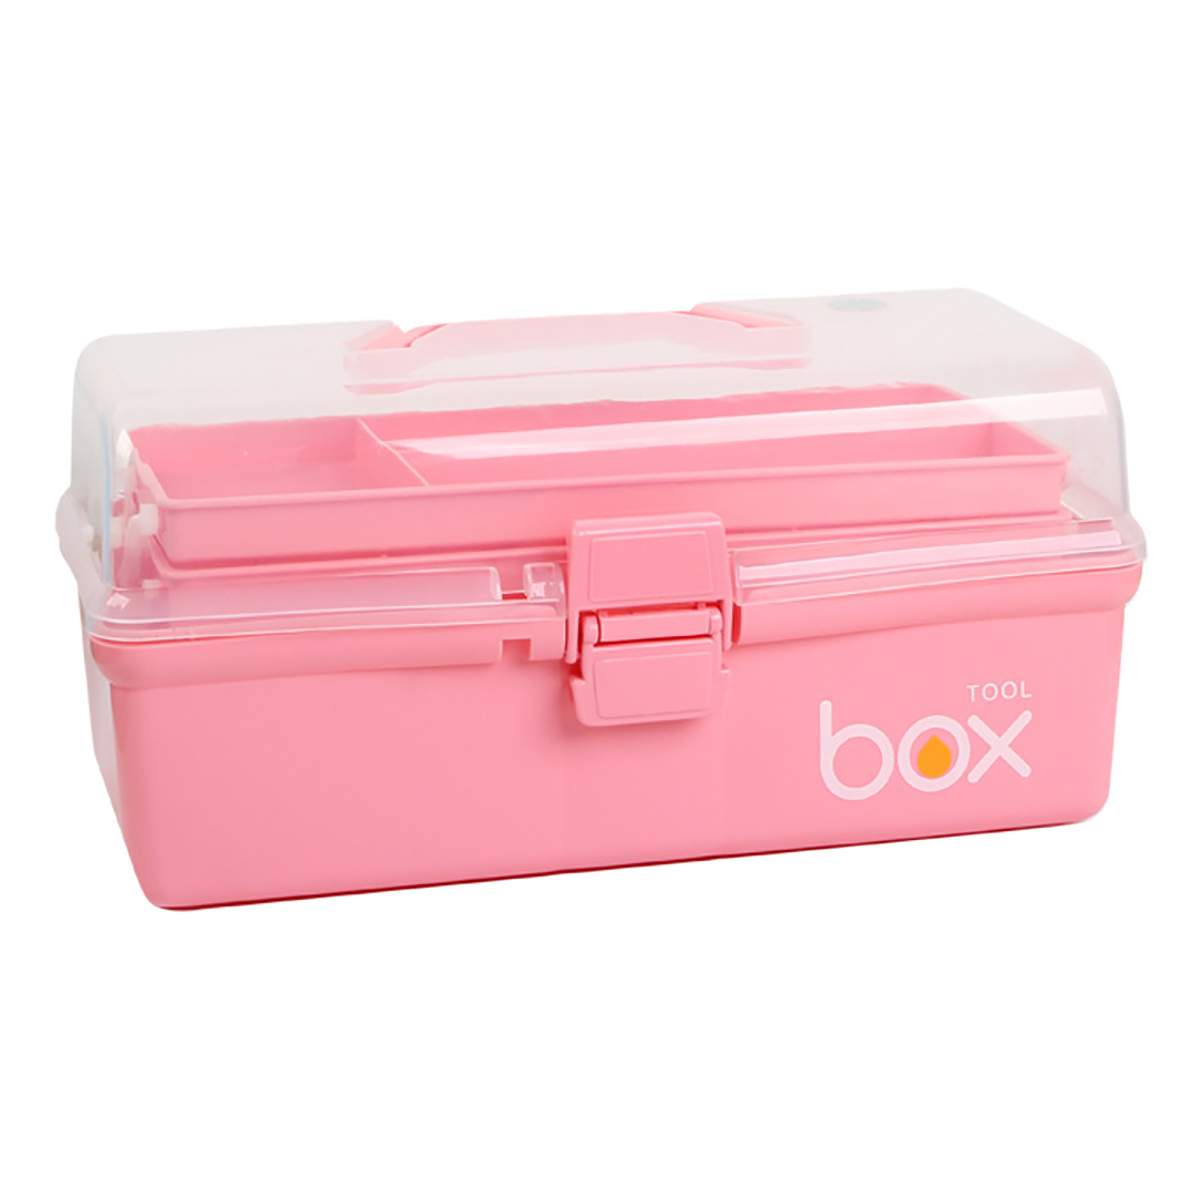 Three-Tier Medical Box Multifunction First Aid Kit Plastic Folding Medical Chest Organizer For Makeup Storage Box